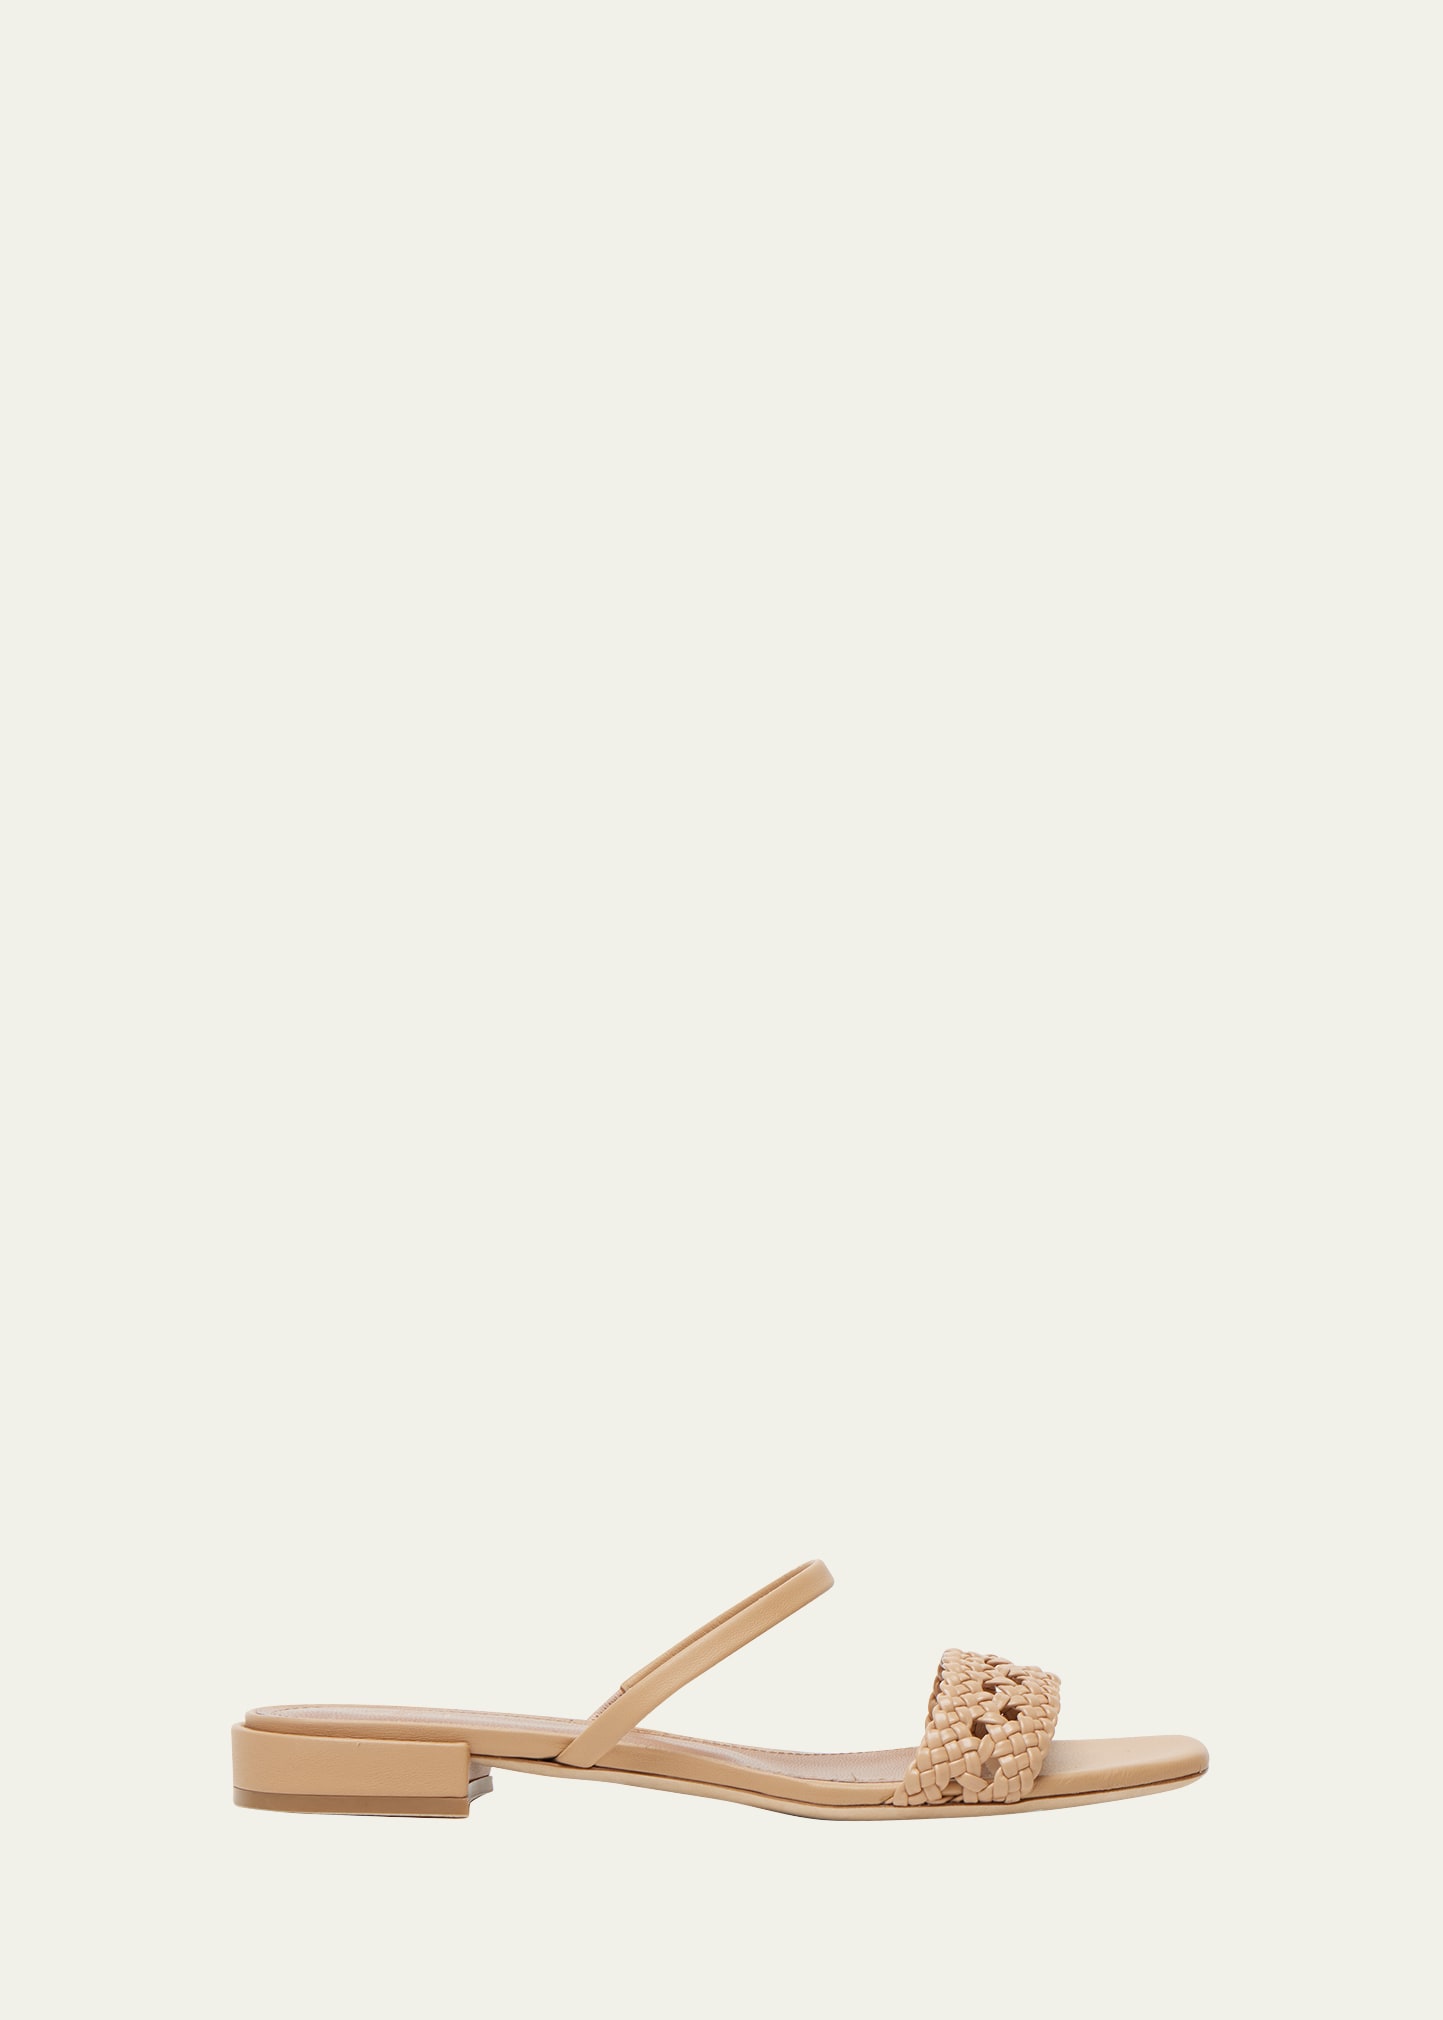 Malone Souliers Braided Leather Flat Slide Sandals In Chai